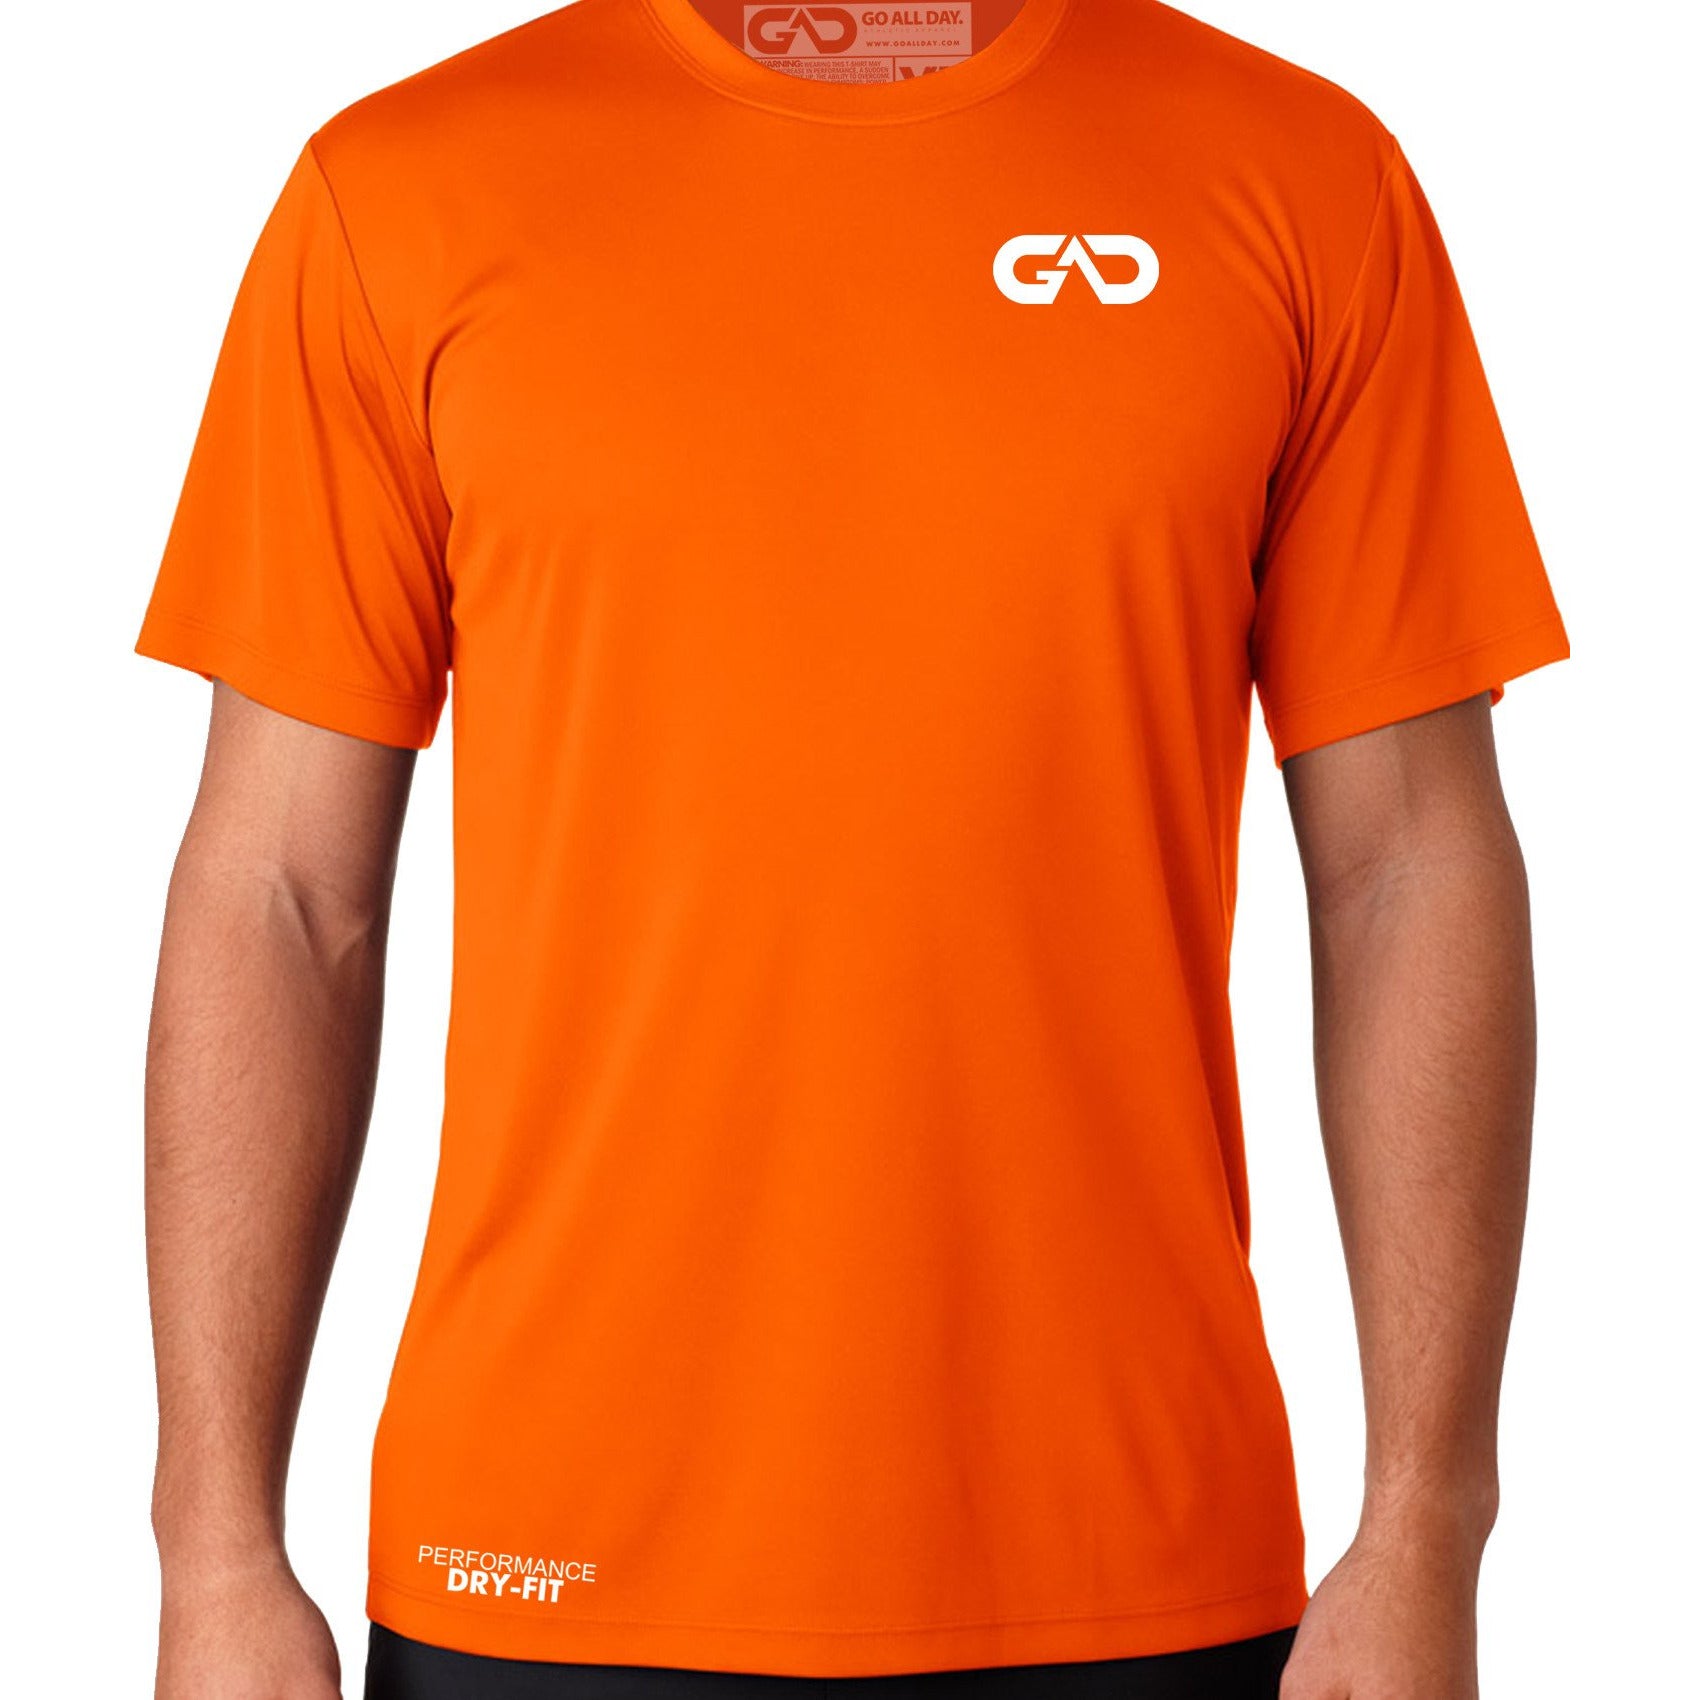 DRY-FIT Tee (Neon Performance GO ALL DAY® Athletic